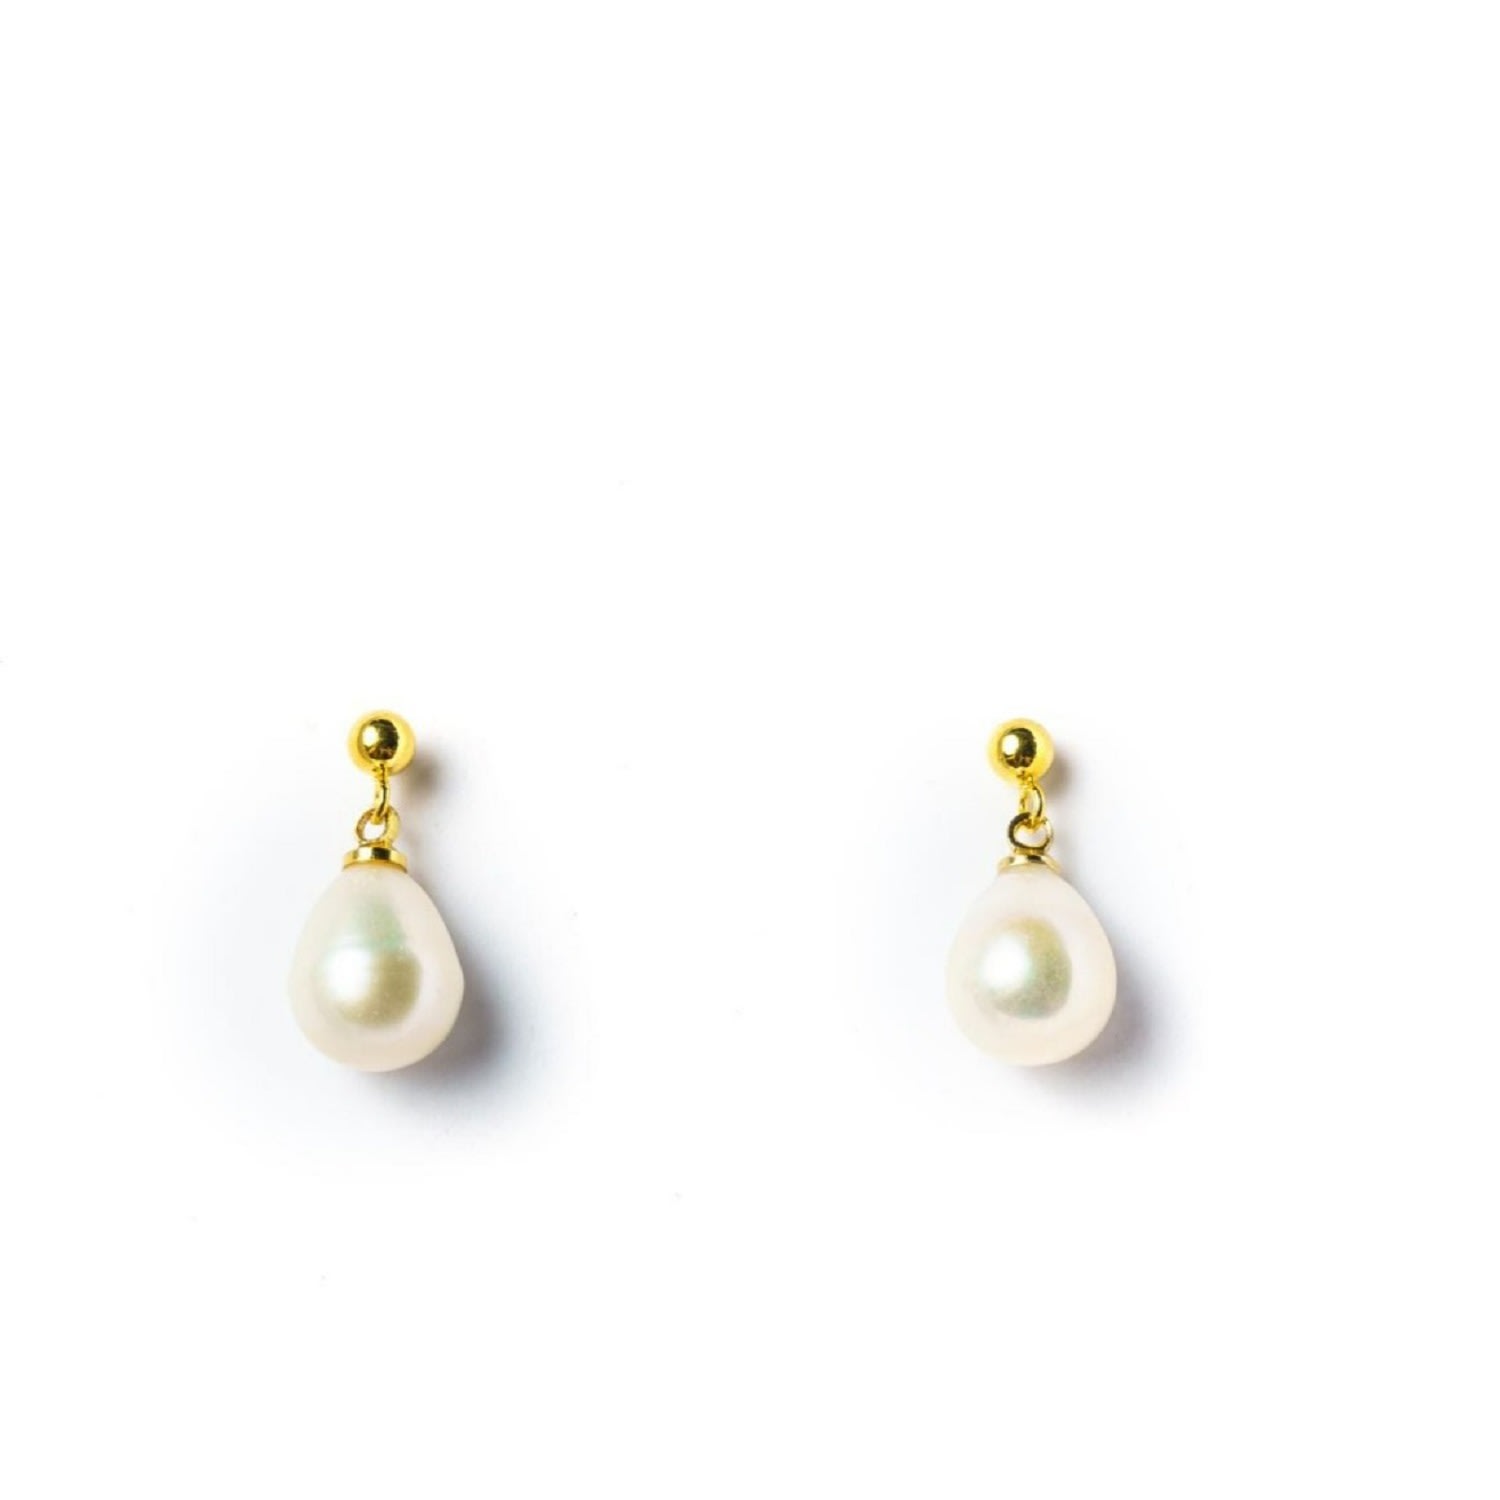 Women's Gold / White The Persephone Earrings 24K Gold Plated Dangle & Drop Freshwater Pearls Earring EUNOIA Jewels